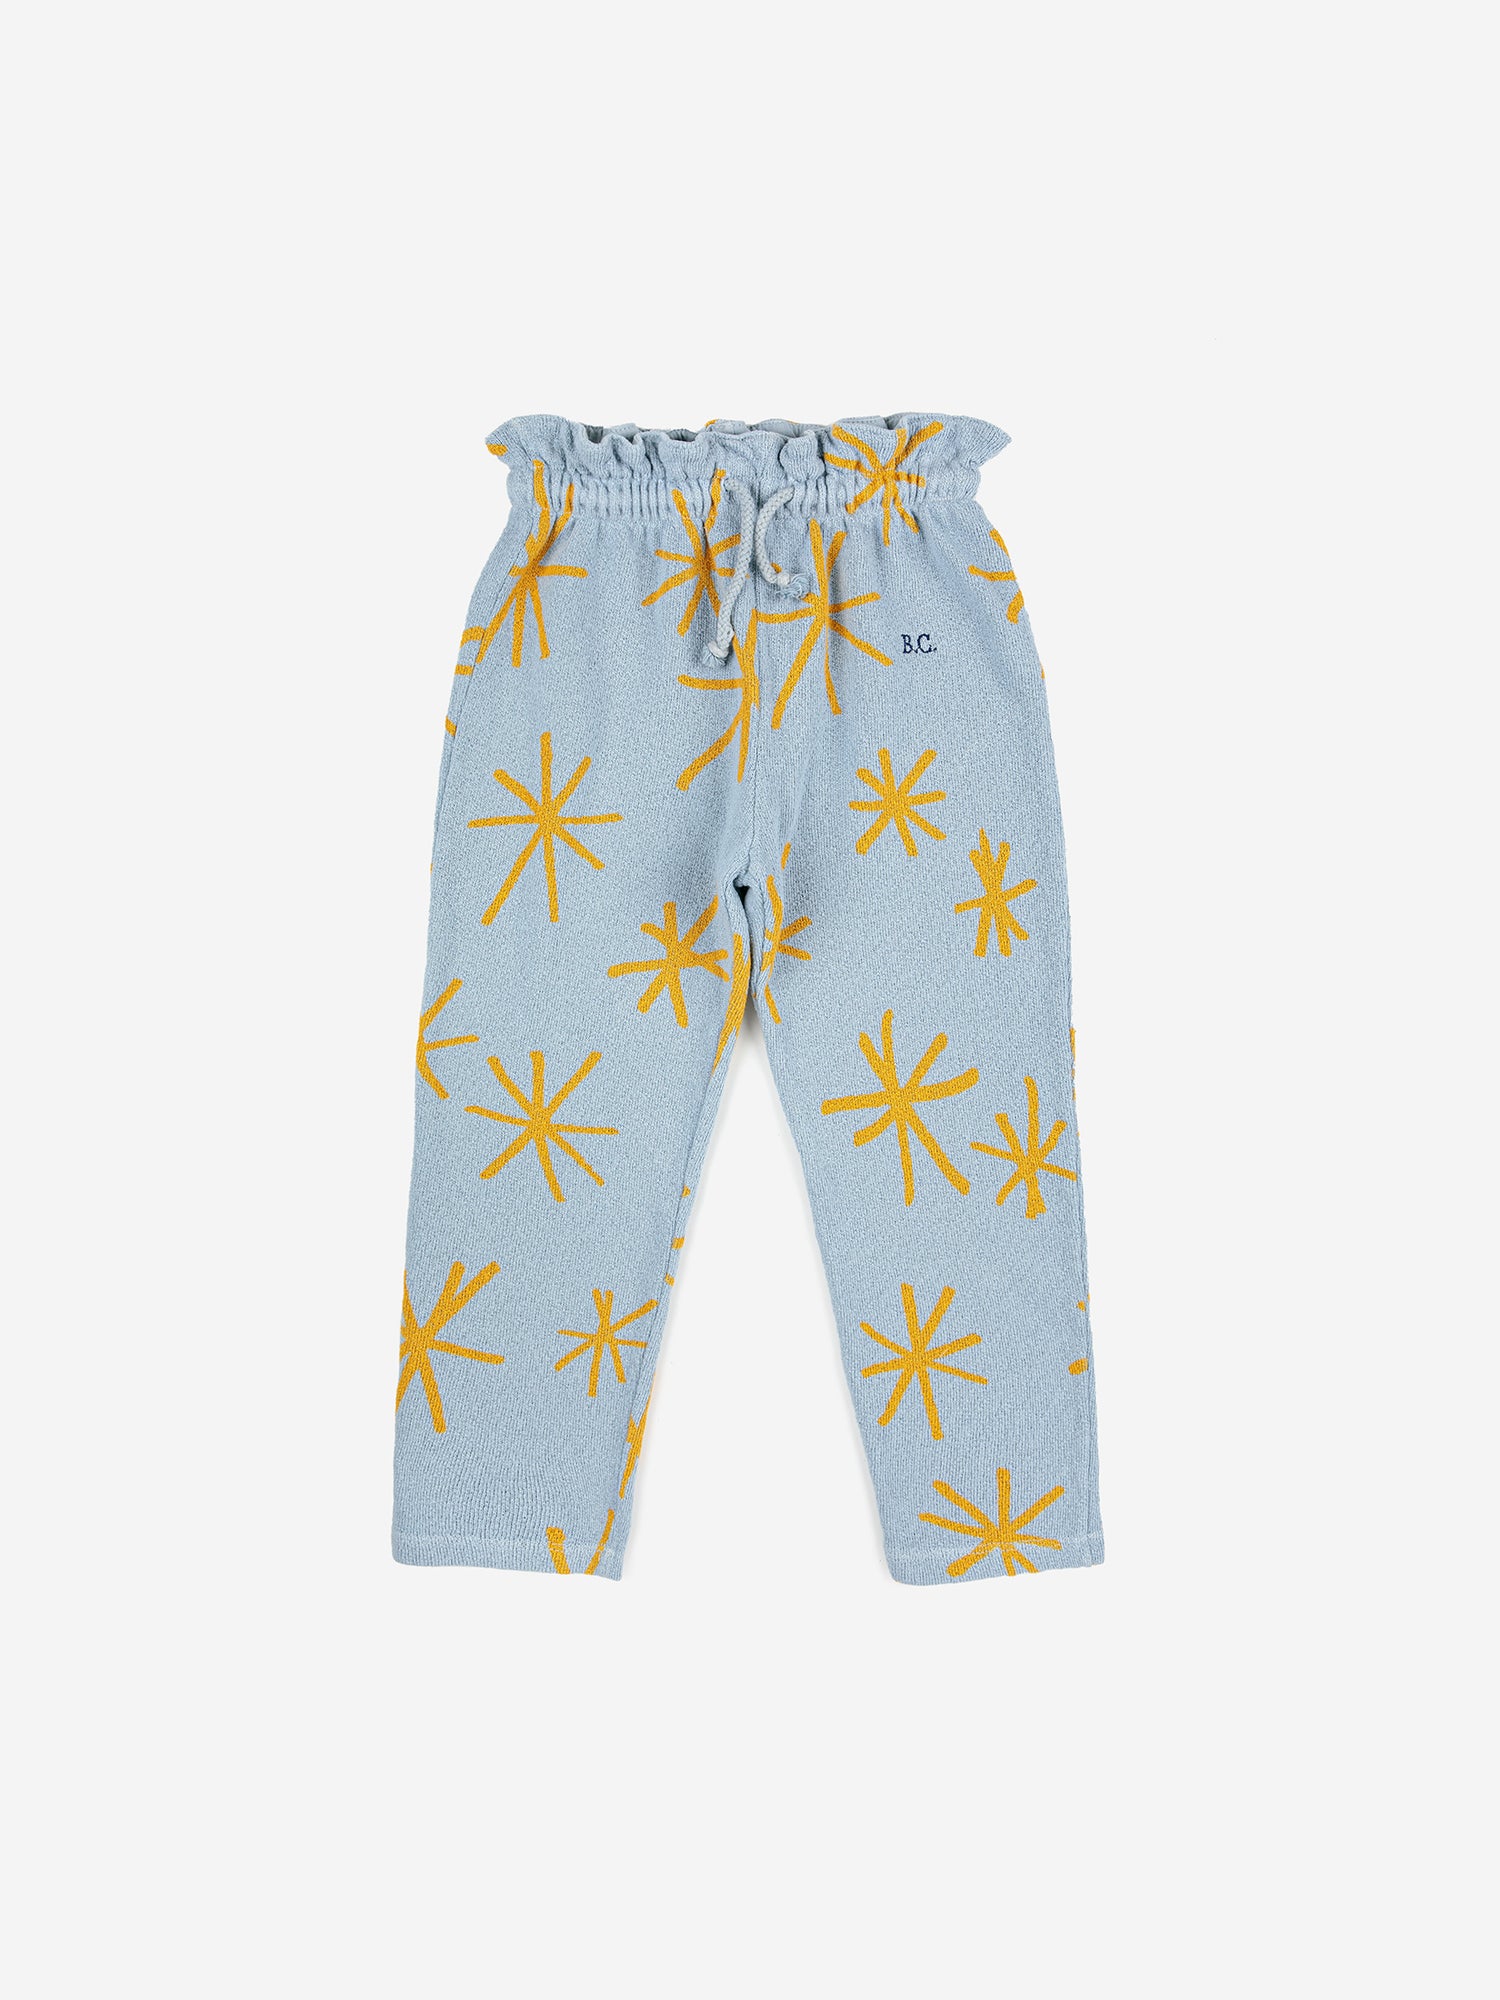 Sparkle Jogging Pants by Bobo Choses. 100% BCI cotton powder blue jogging pants with yellow sparkle print. Designed with adjustable ruffled waistband, ankle length and sooo soft inside. It has a baggy fit.   Made ethically and sustainably in Portugal for Bobo Choses.